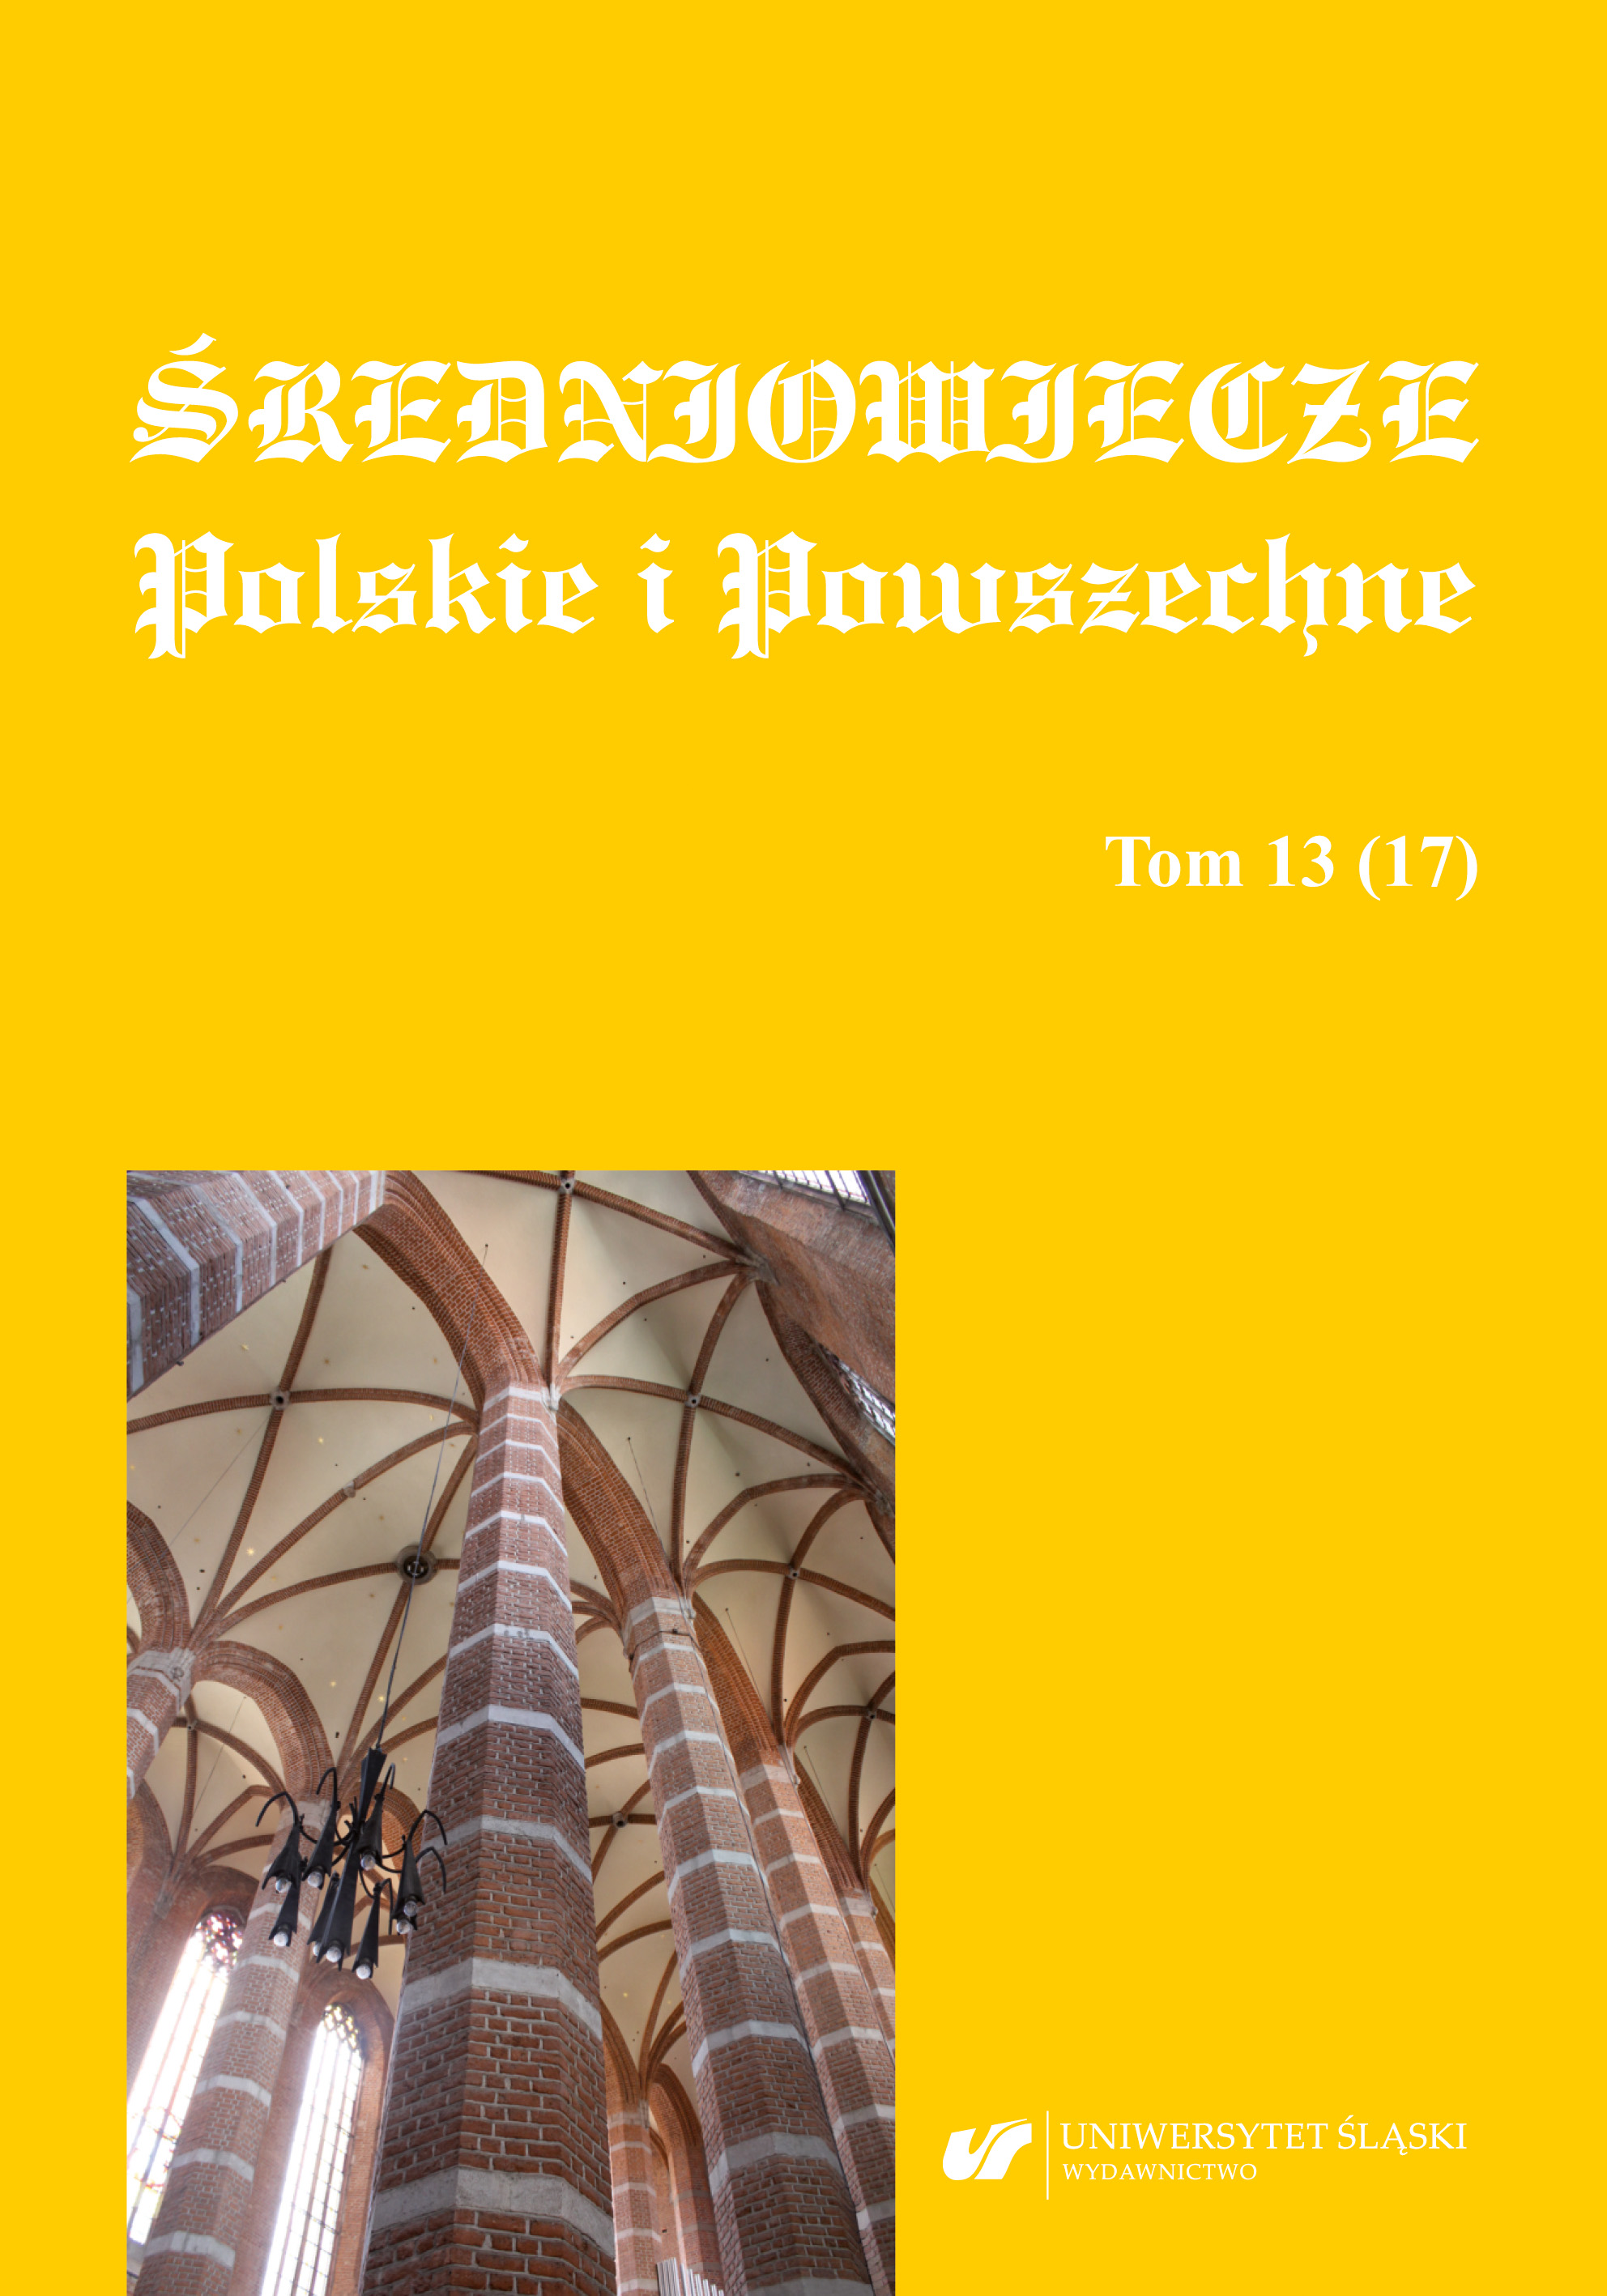 Books of the Craft Corporations of Proszowice from the 15th Century. A Contribution to the Study of Urban Literacy in the Middle Ages Cover Image